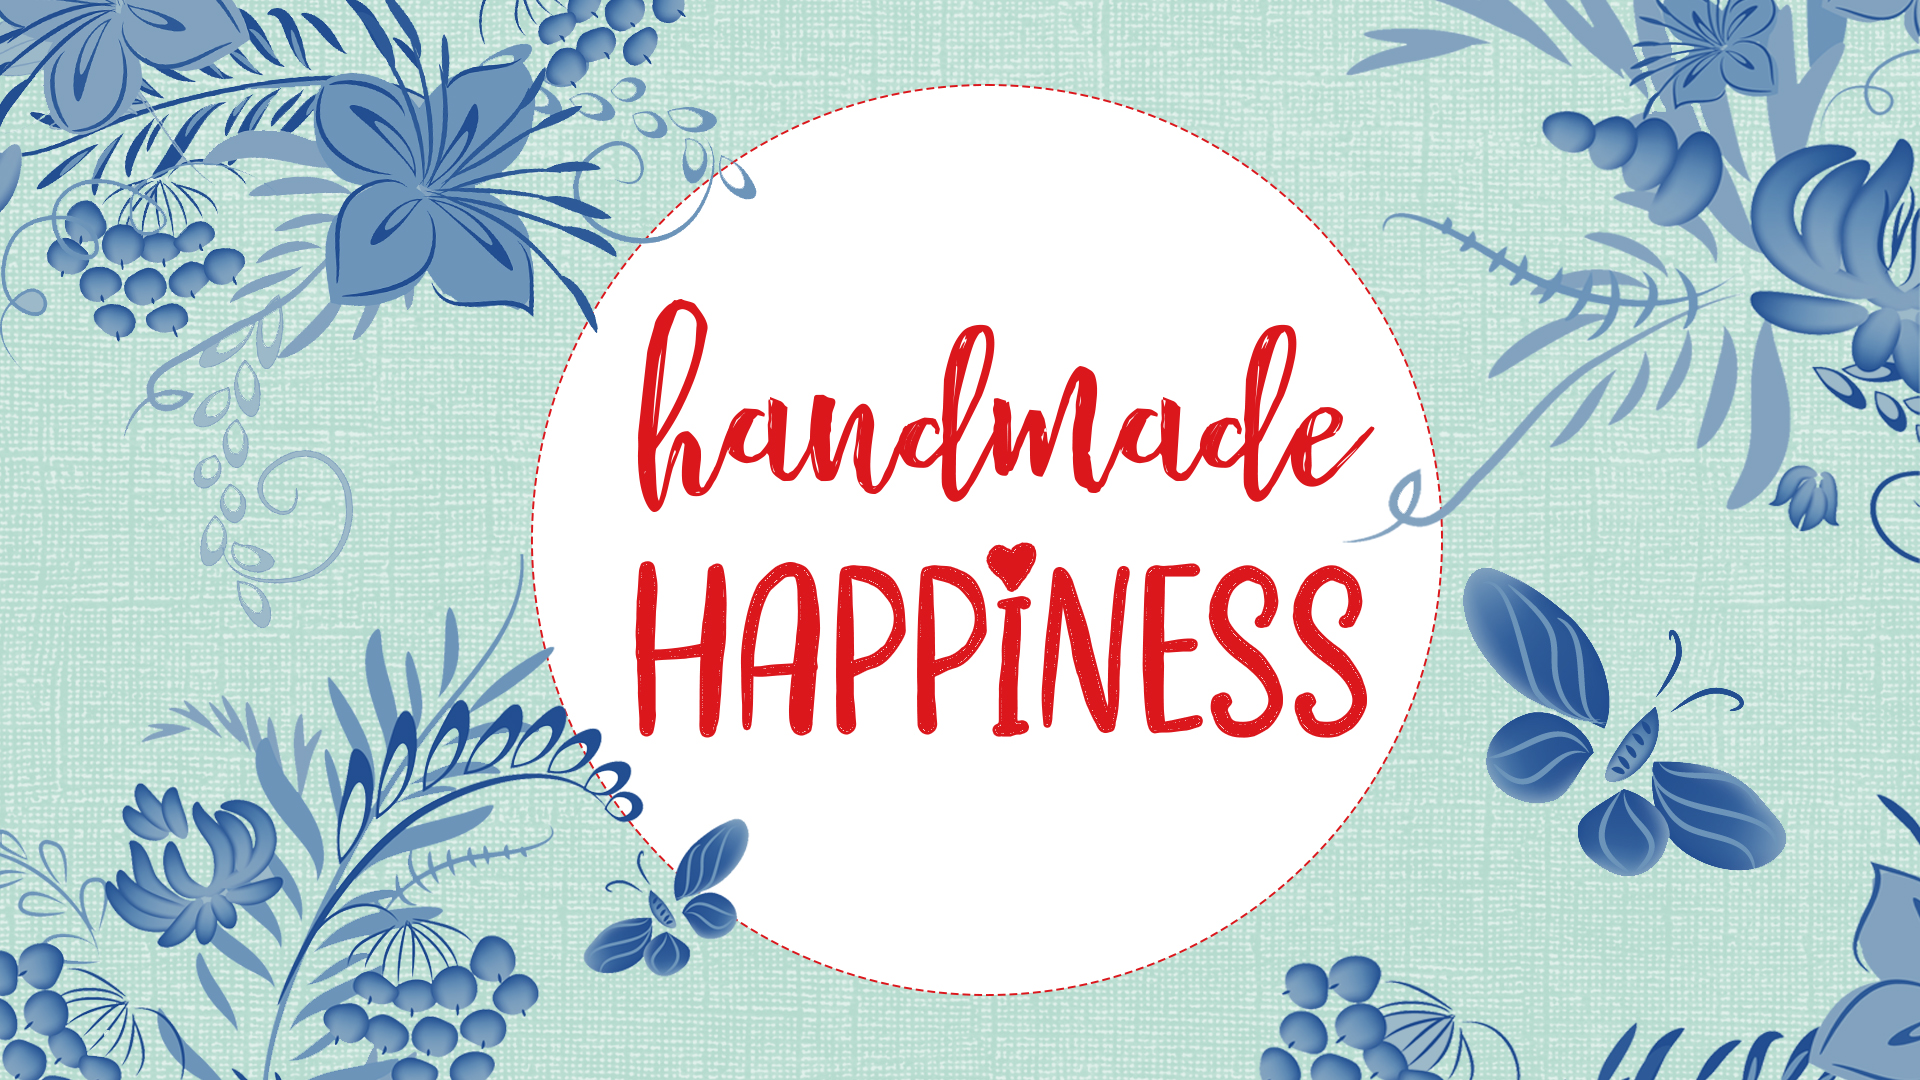 Image reads "Handmade Happiness" on a blue floral background.